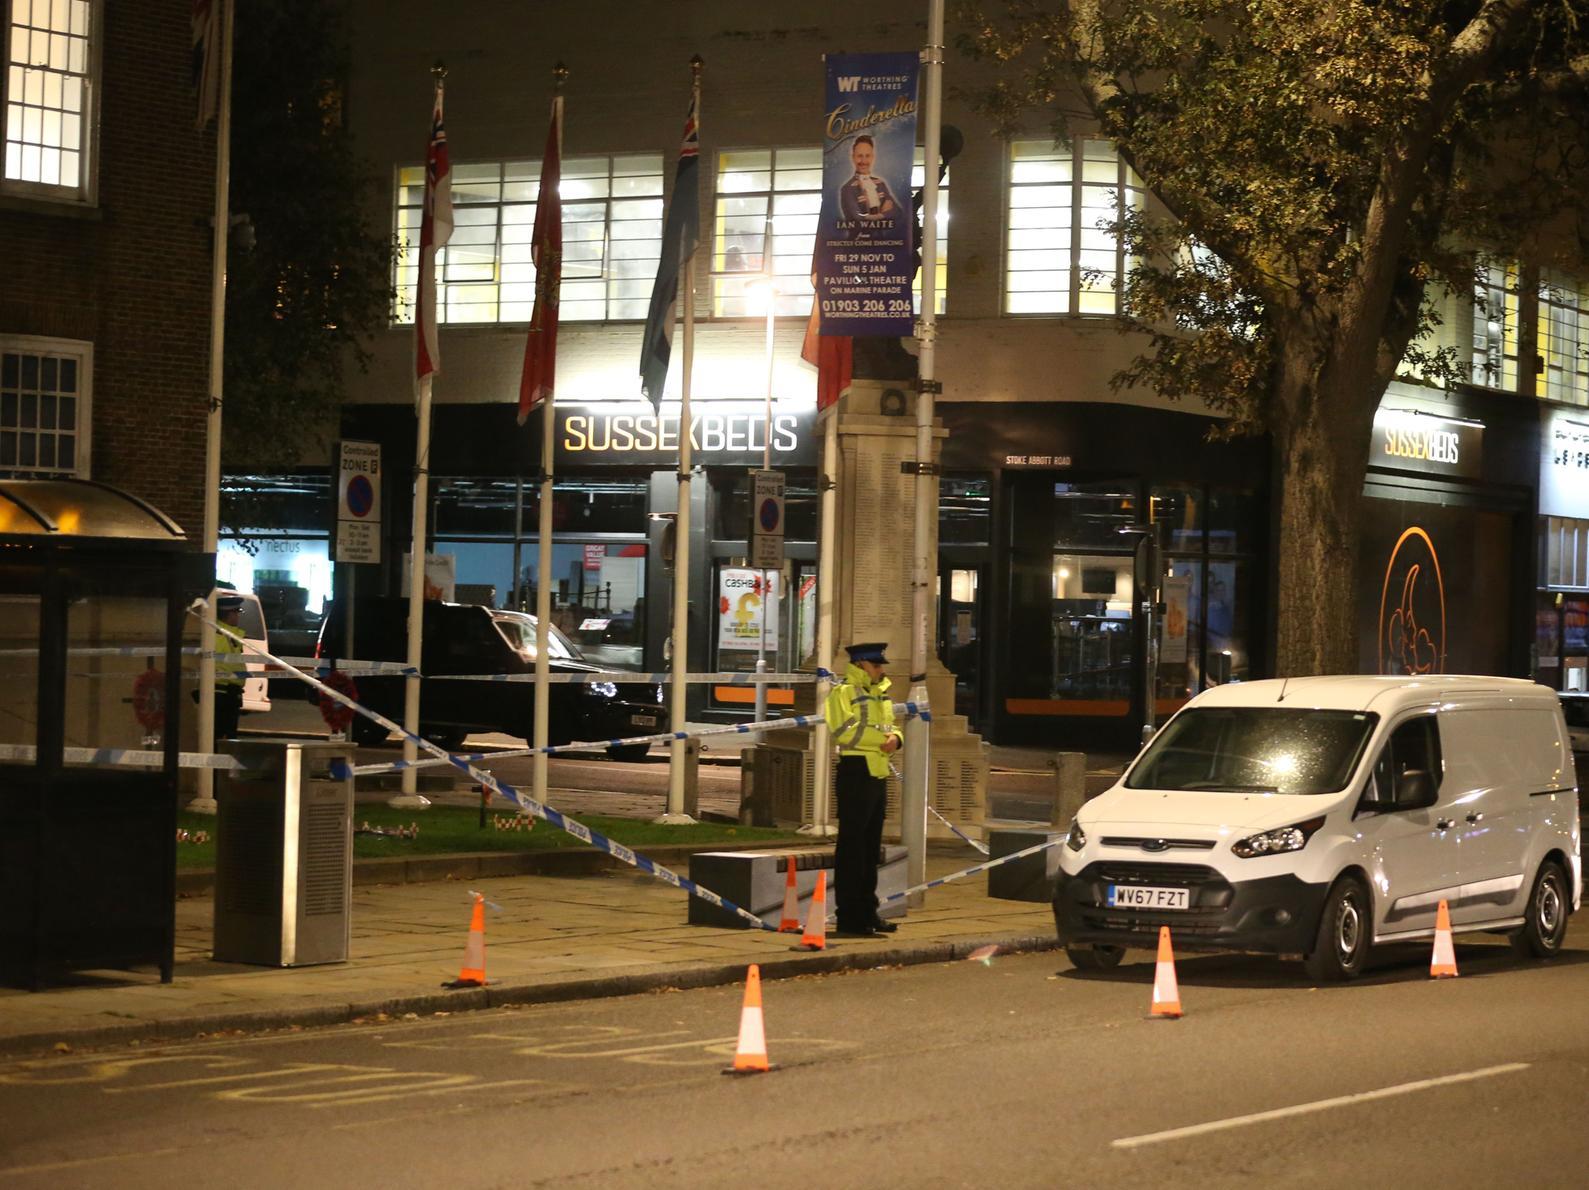 The scene of the incident outside Worthing Town Hall